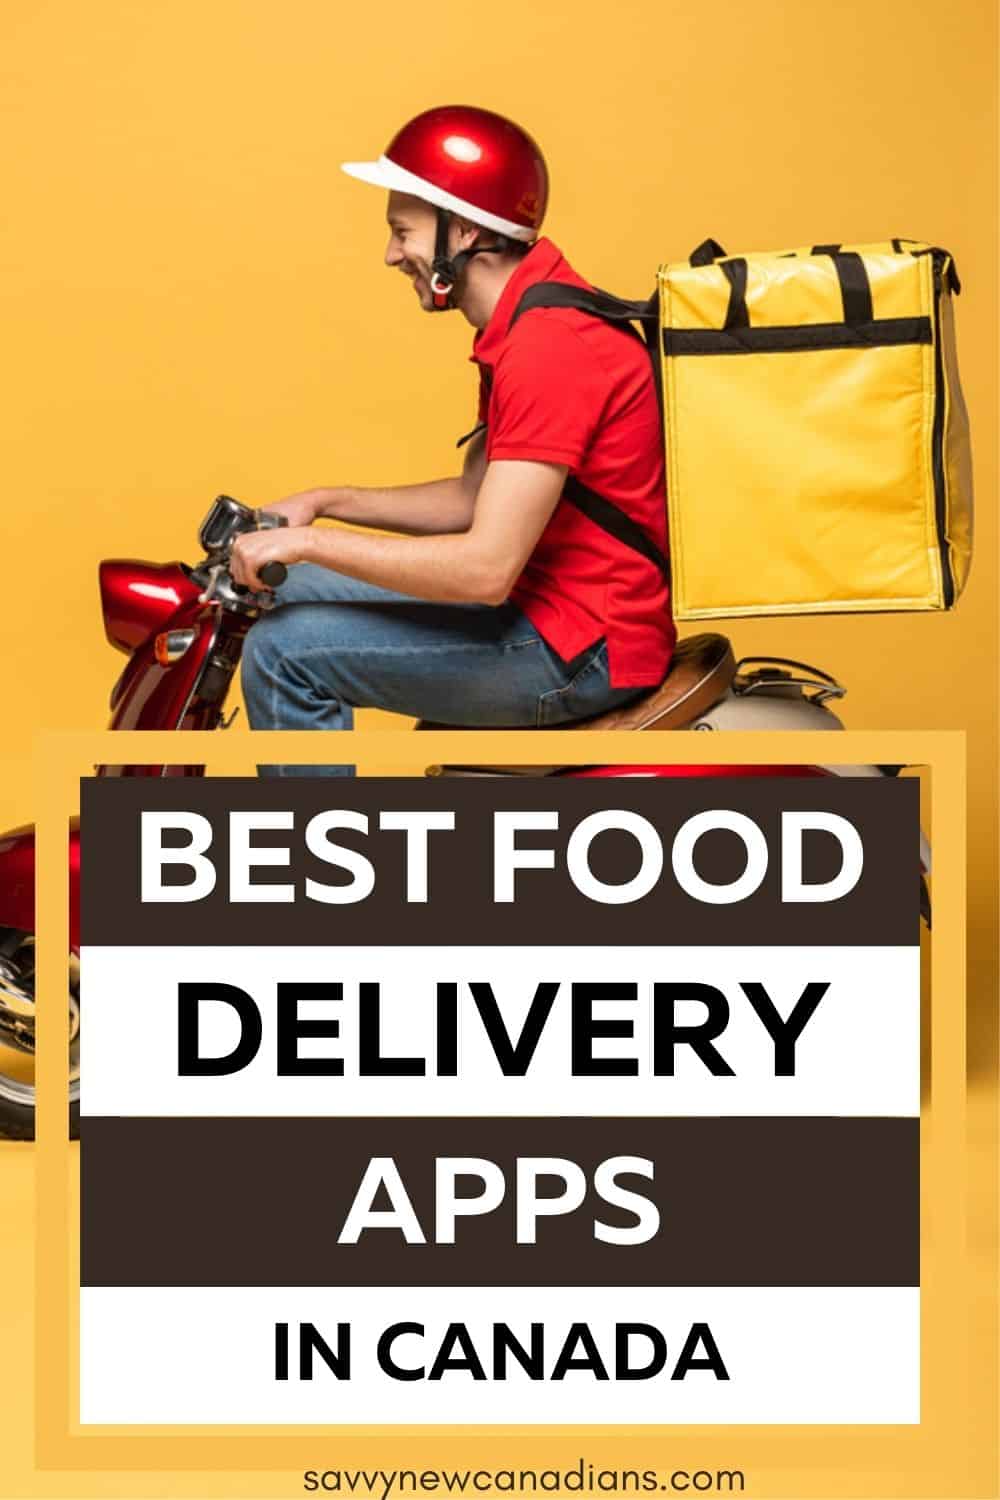 Best Food Delivery Apps and Services in Canada